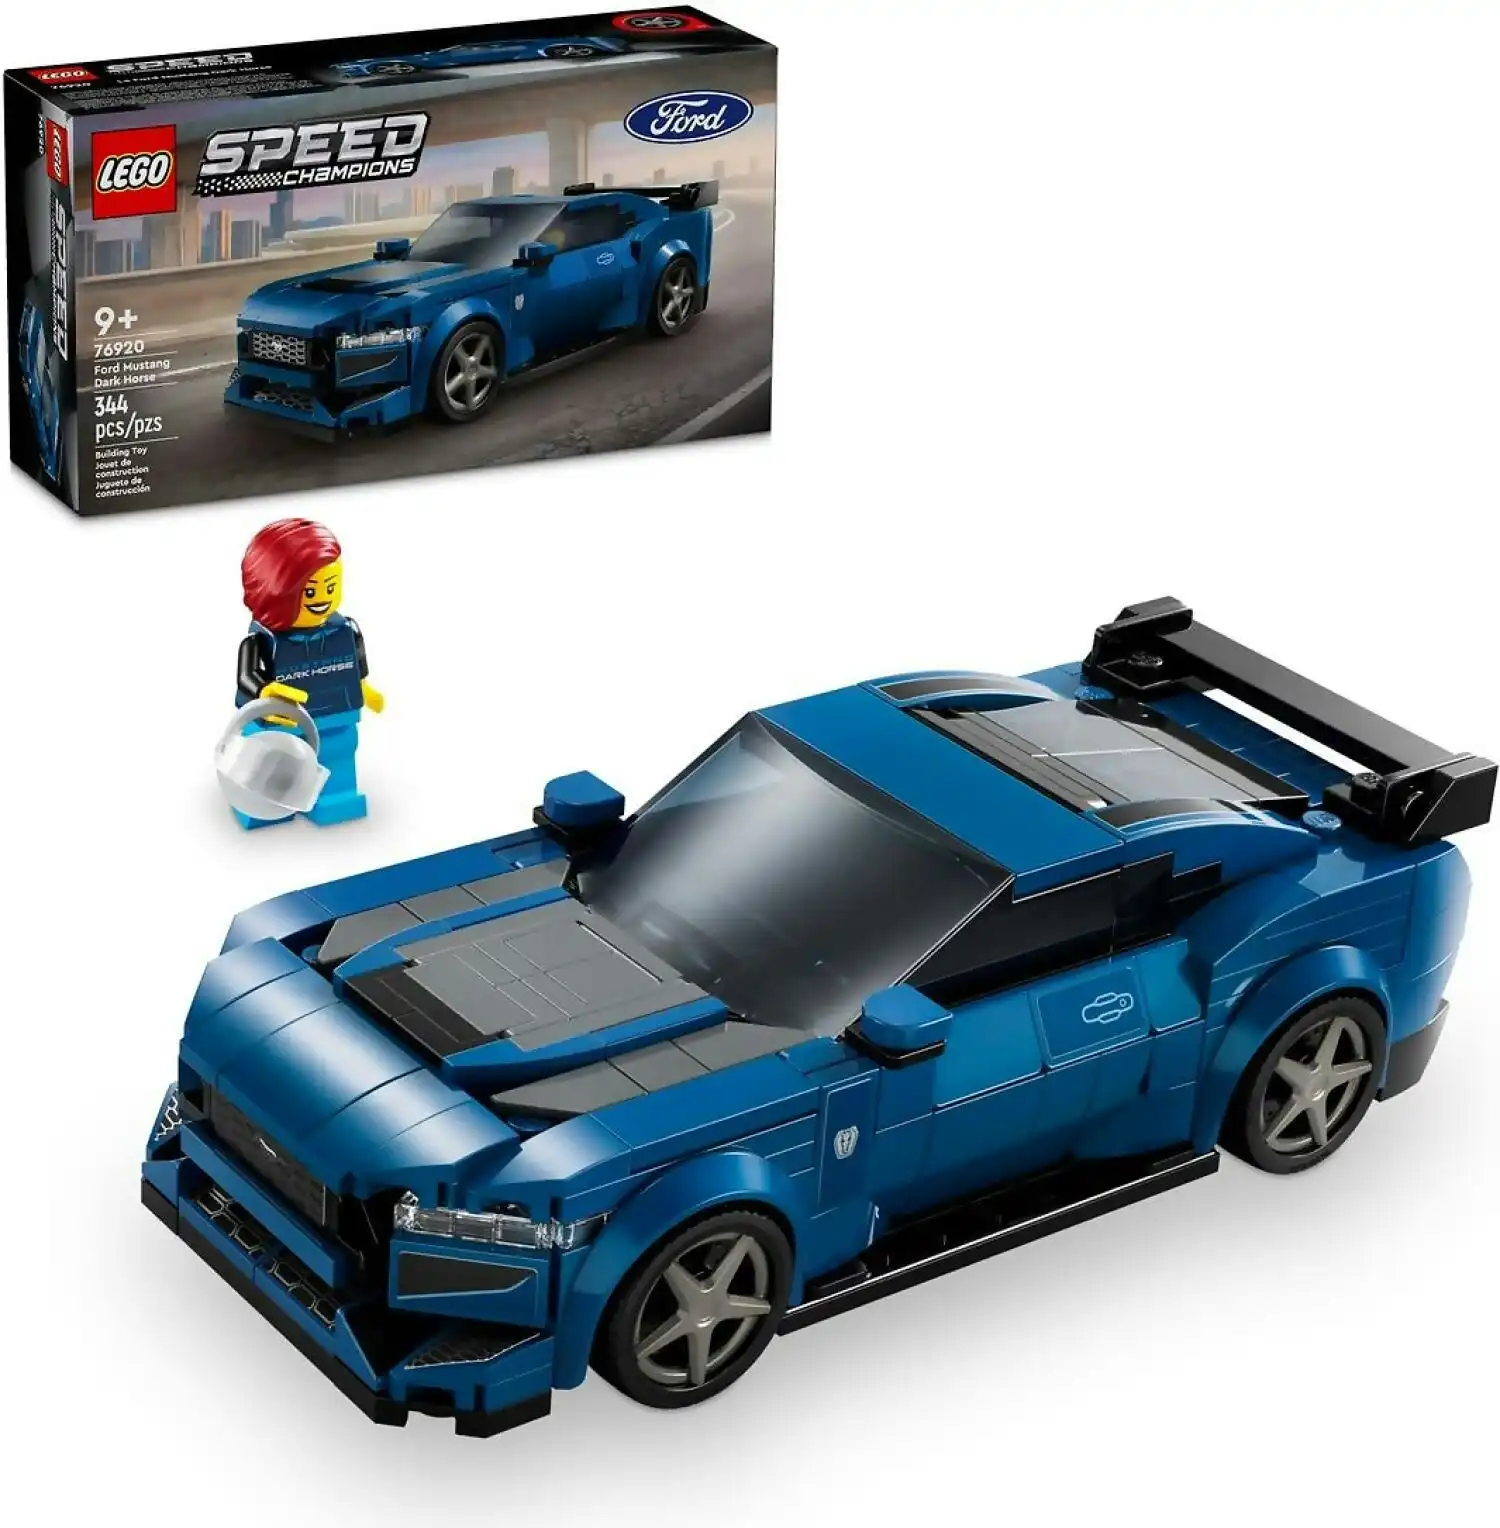 LEGO 76920 Ford Mustang Dark Horse Sports Car - Speed Champions